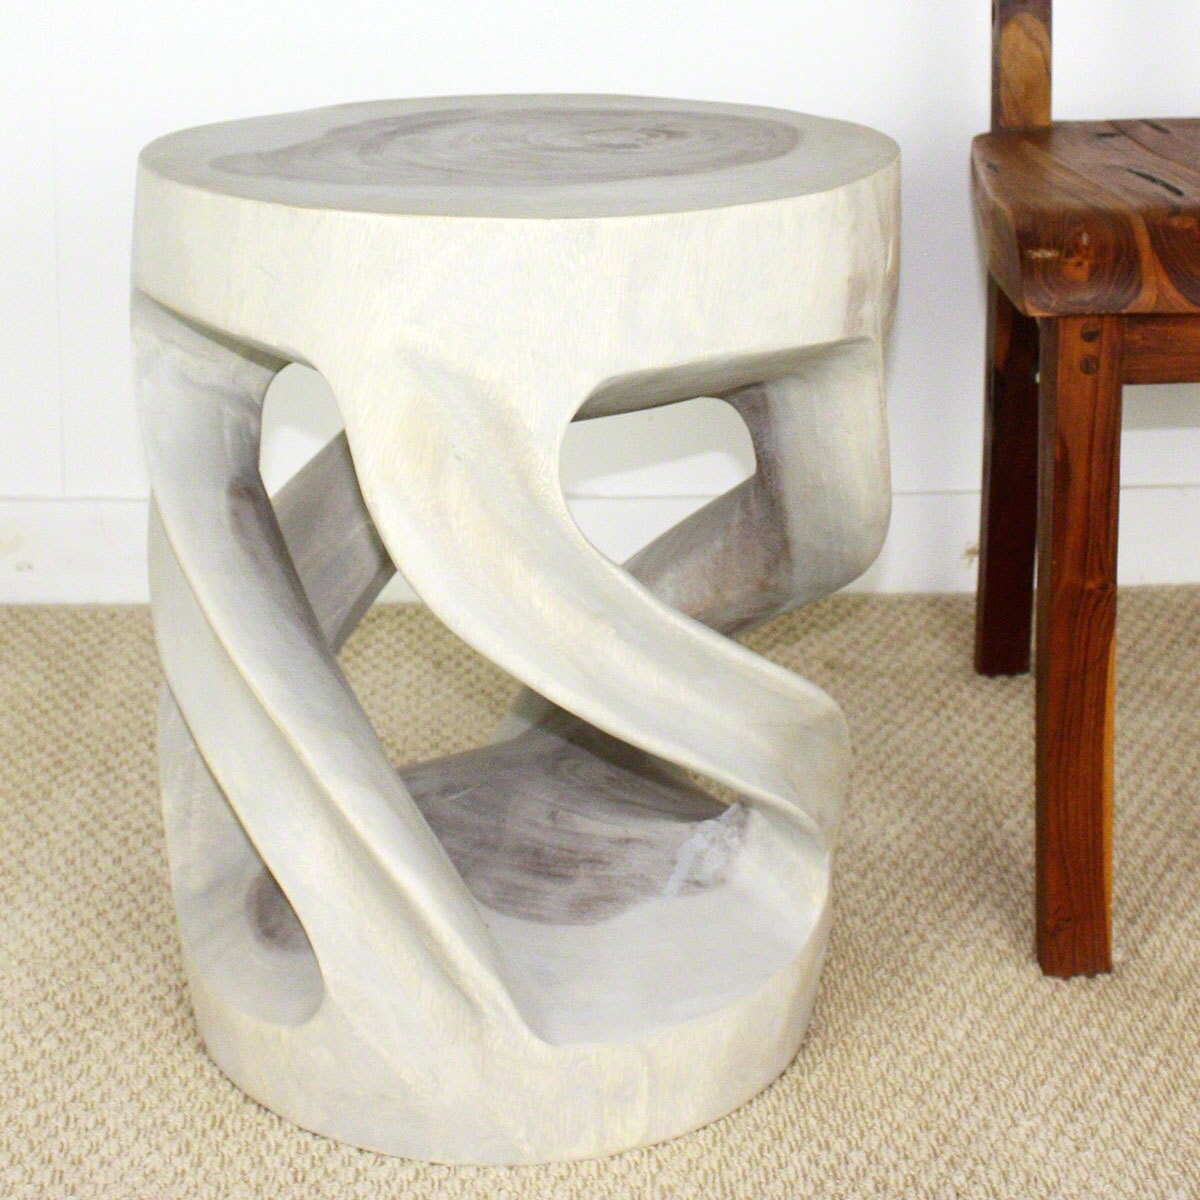 Tapered Round Wild Twisted Vine Wood End Table 16x14x20 inch Ht w Agate Grey Oil